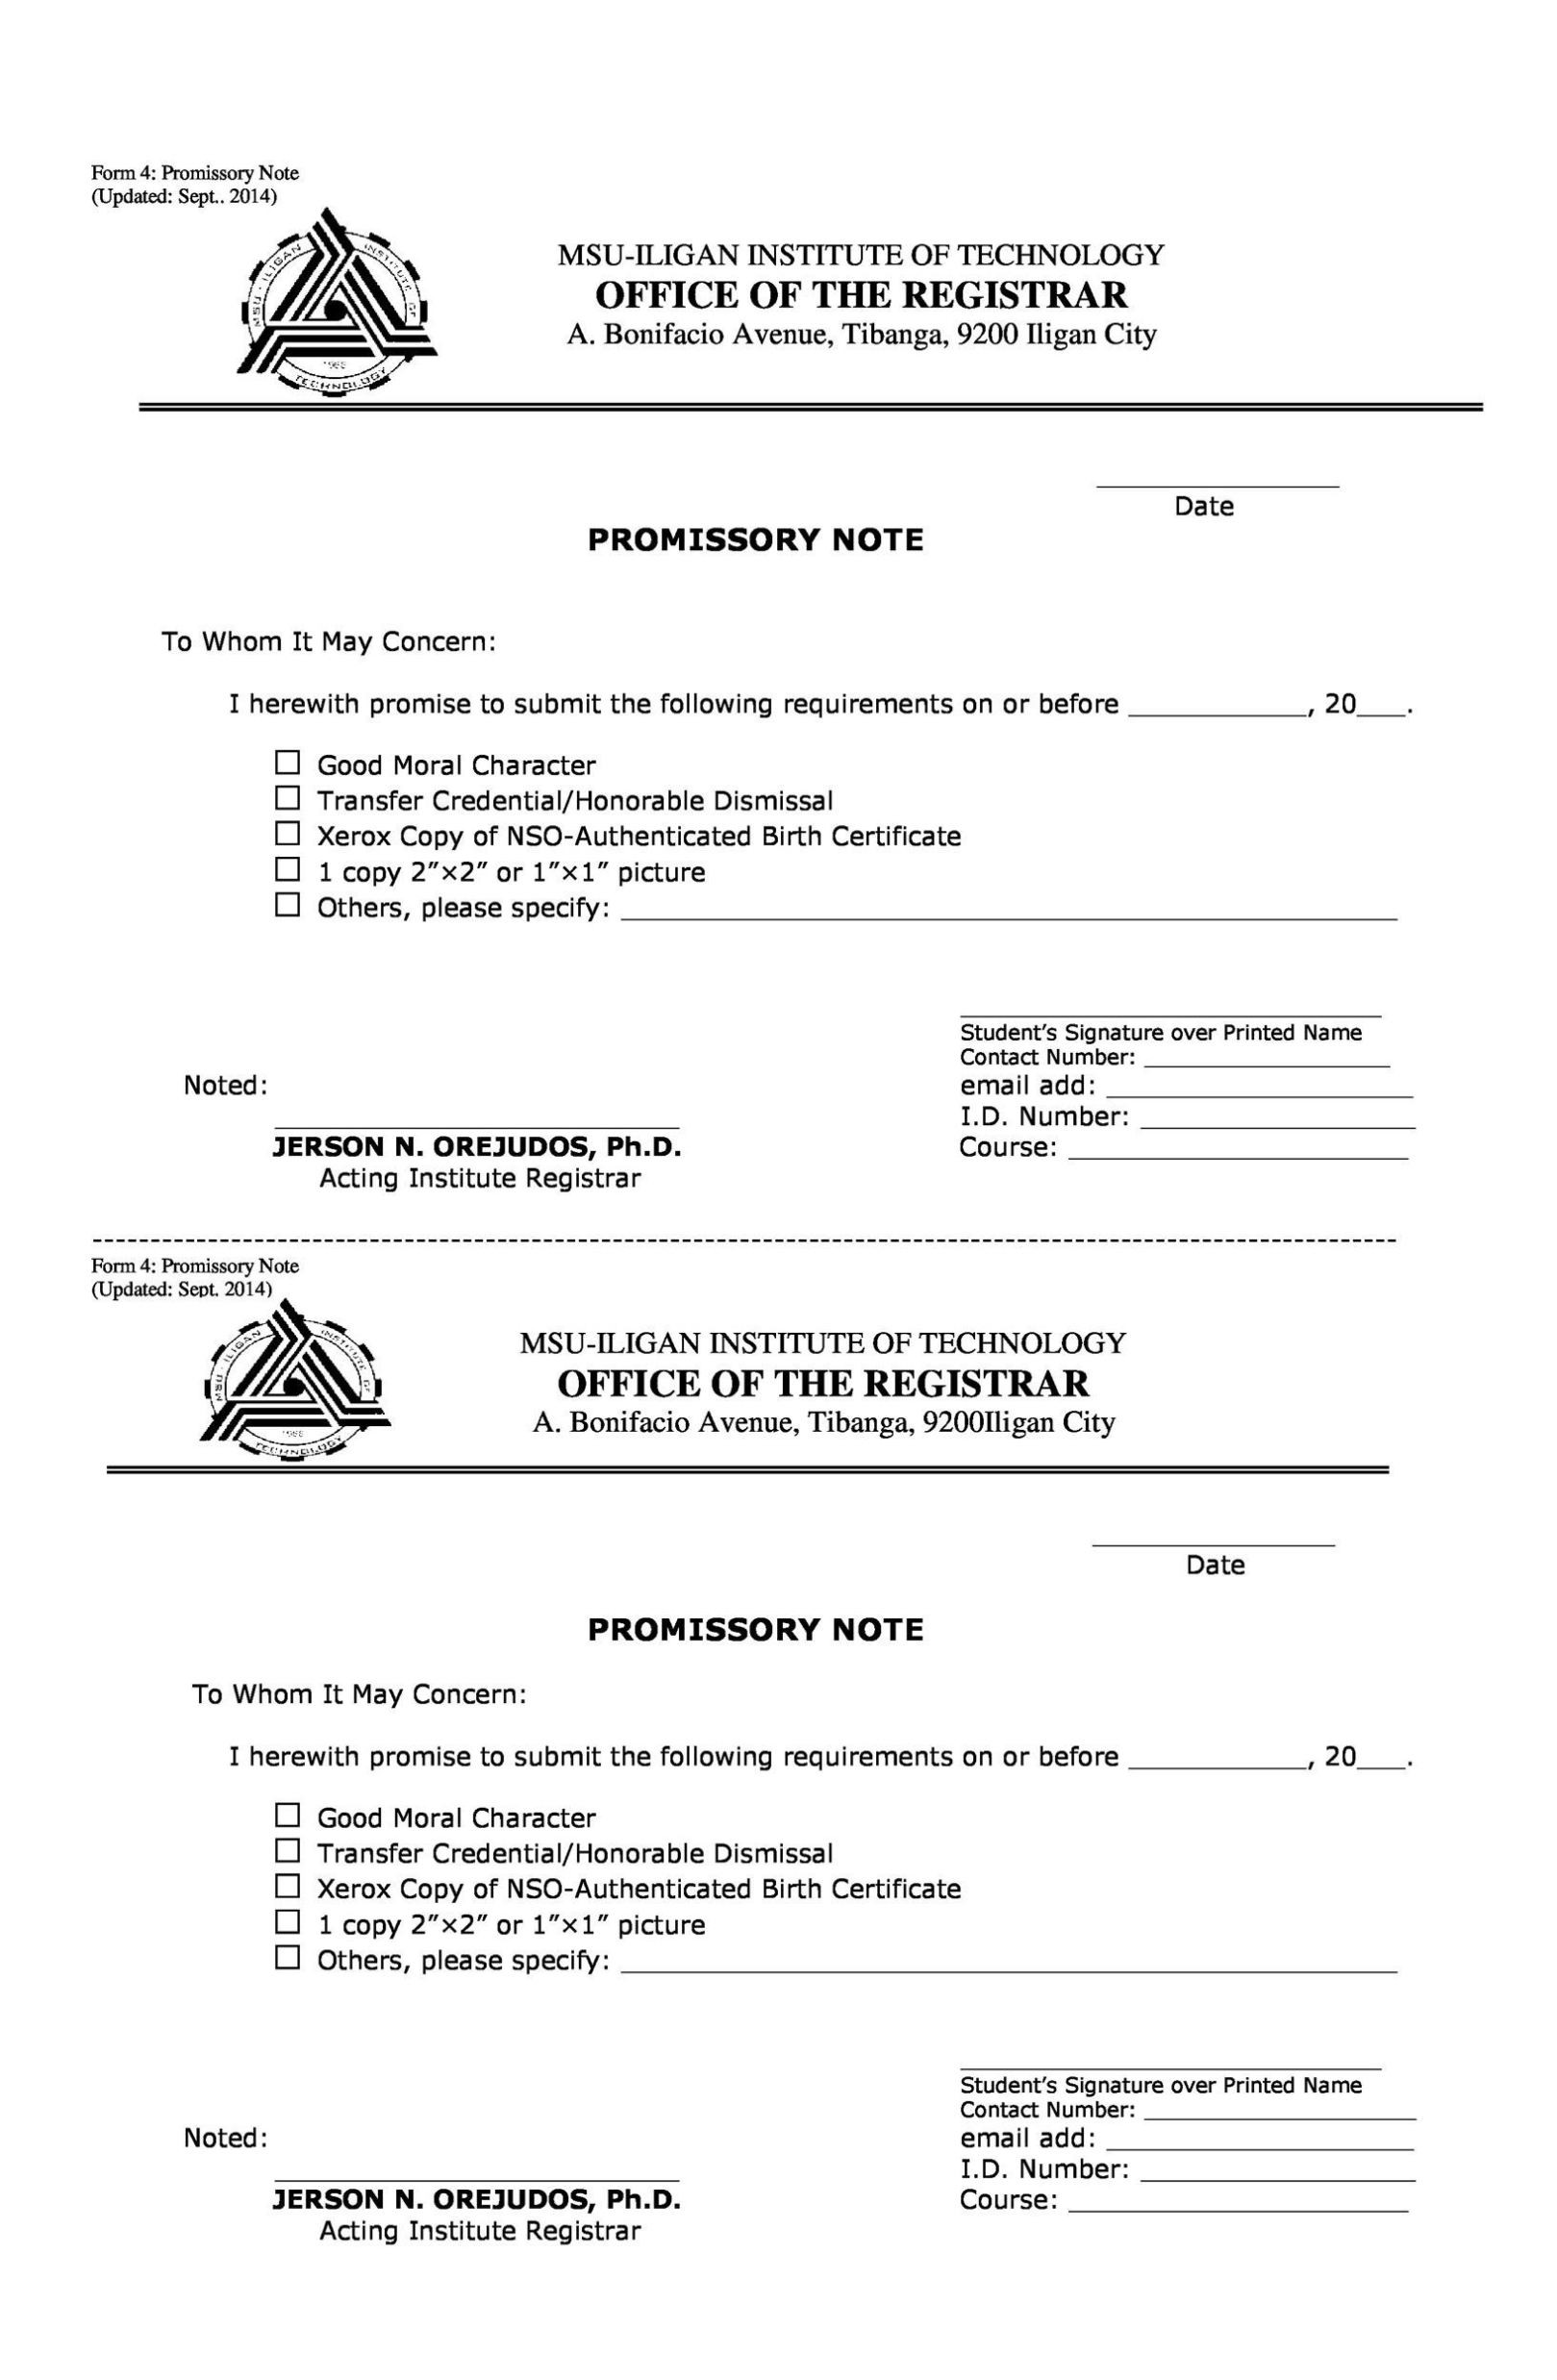 45 Free Promissory Note Templates & Forms [Word & Pdf] ᐅ Templatelab Throughout Simple Interest Promissory Note Template